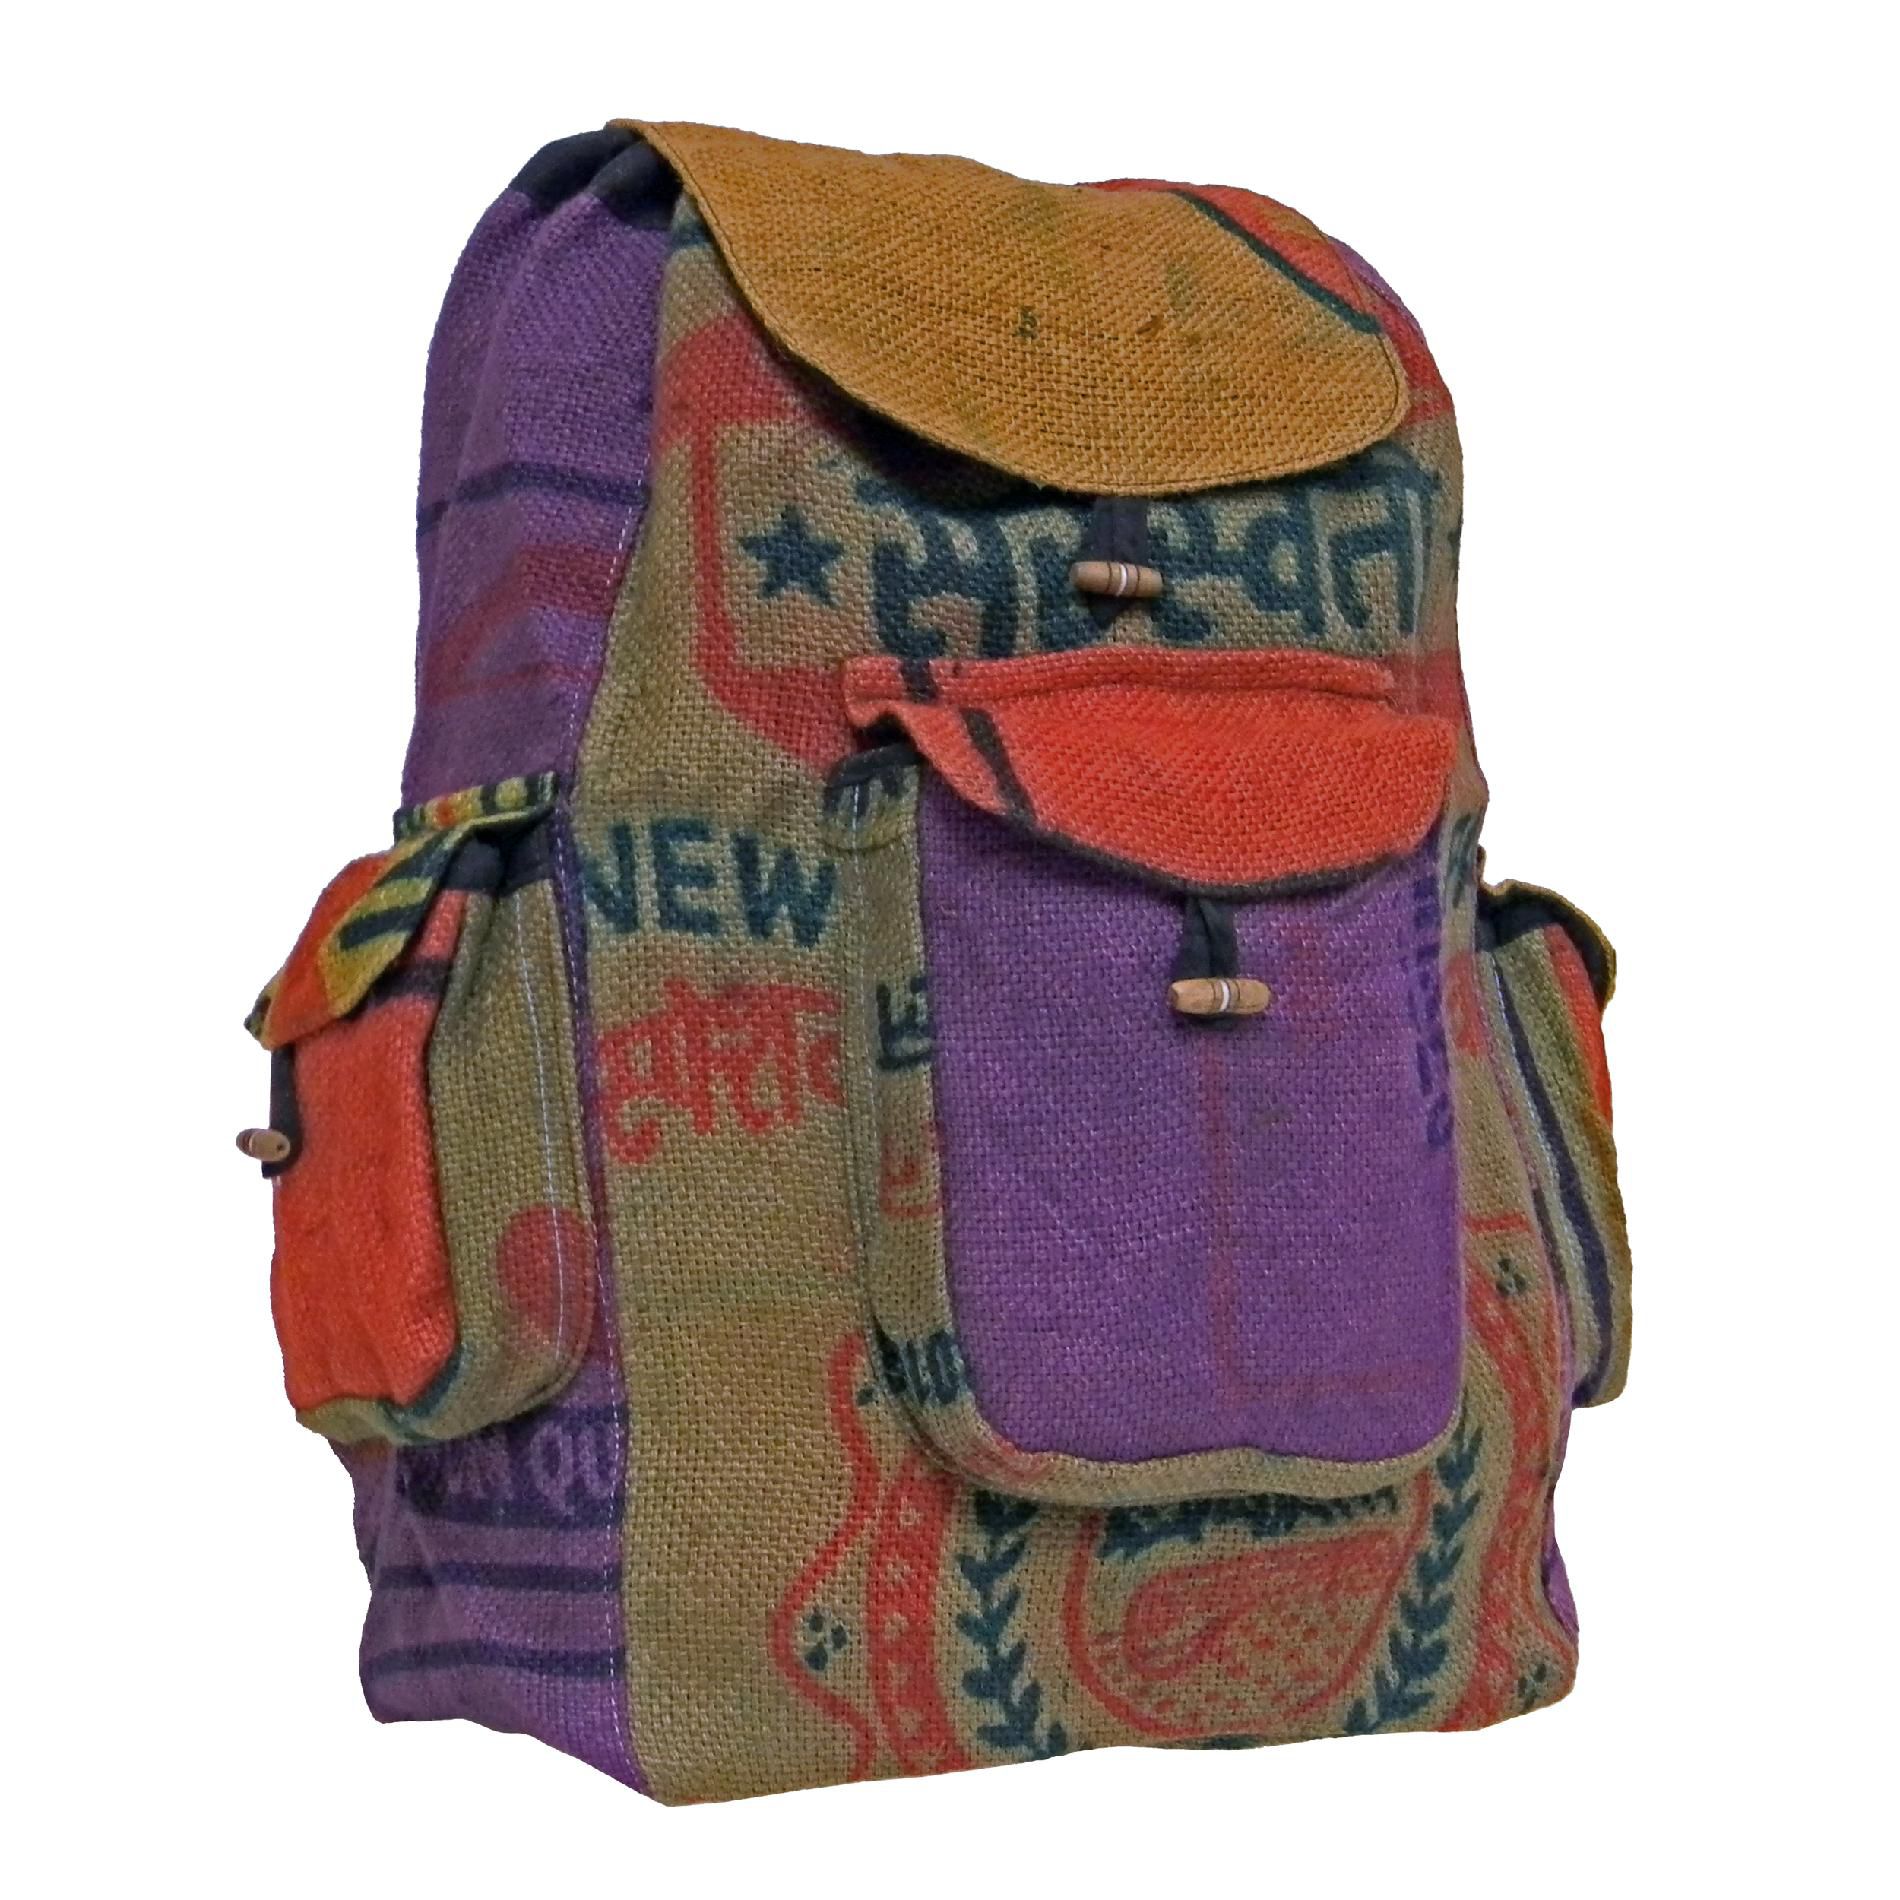 Artisan Handicrafts Handcrafted Recycled Jute Backpack